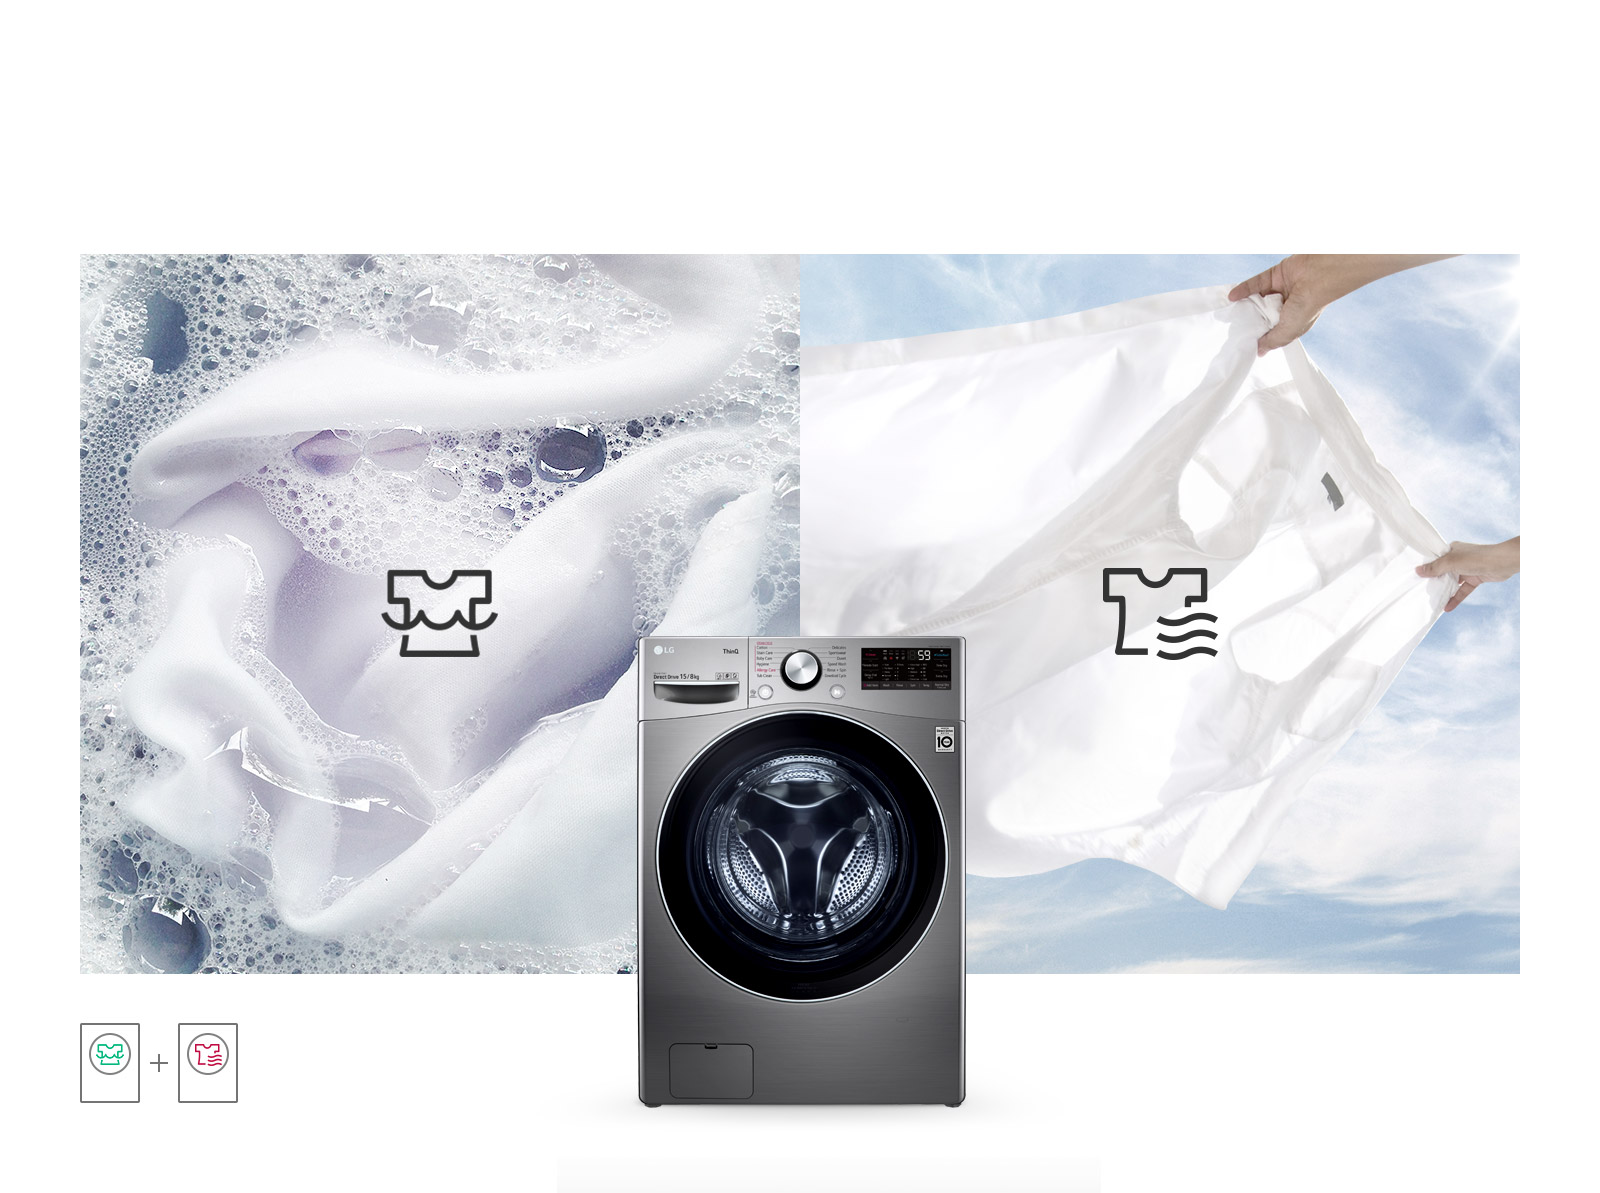 One background image features a white shirt with suds in the wash cycle and the second background images shows the white shirt in the dry cycle. In the foreground is the TopGun2.